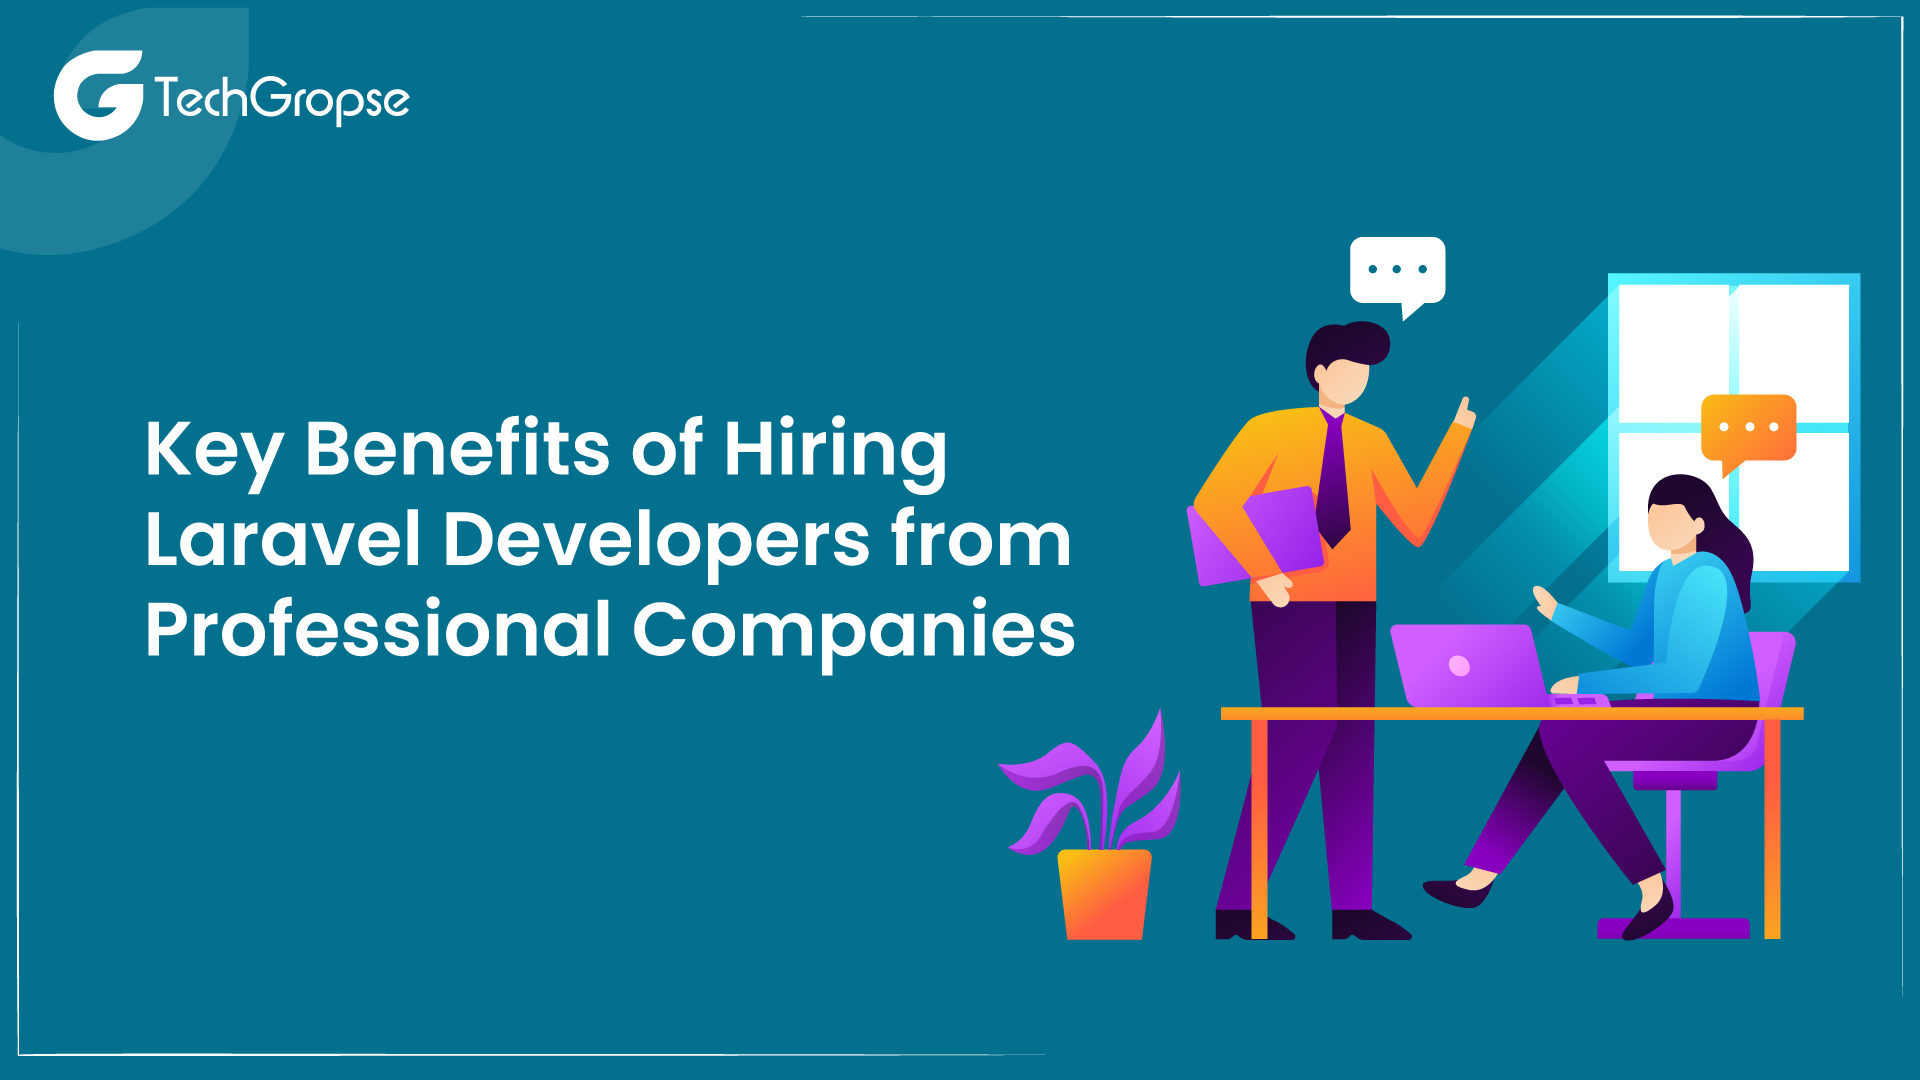 Key Benefits of Hiring Laravel Developers from Professional Companies